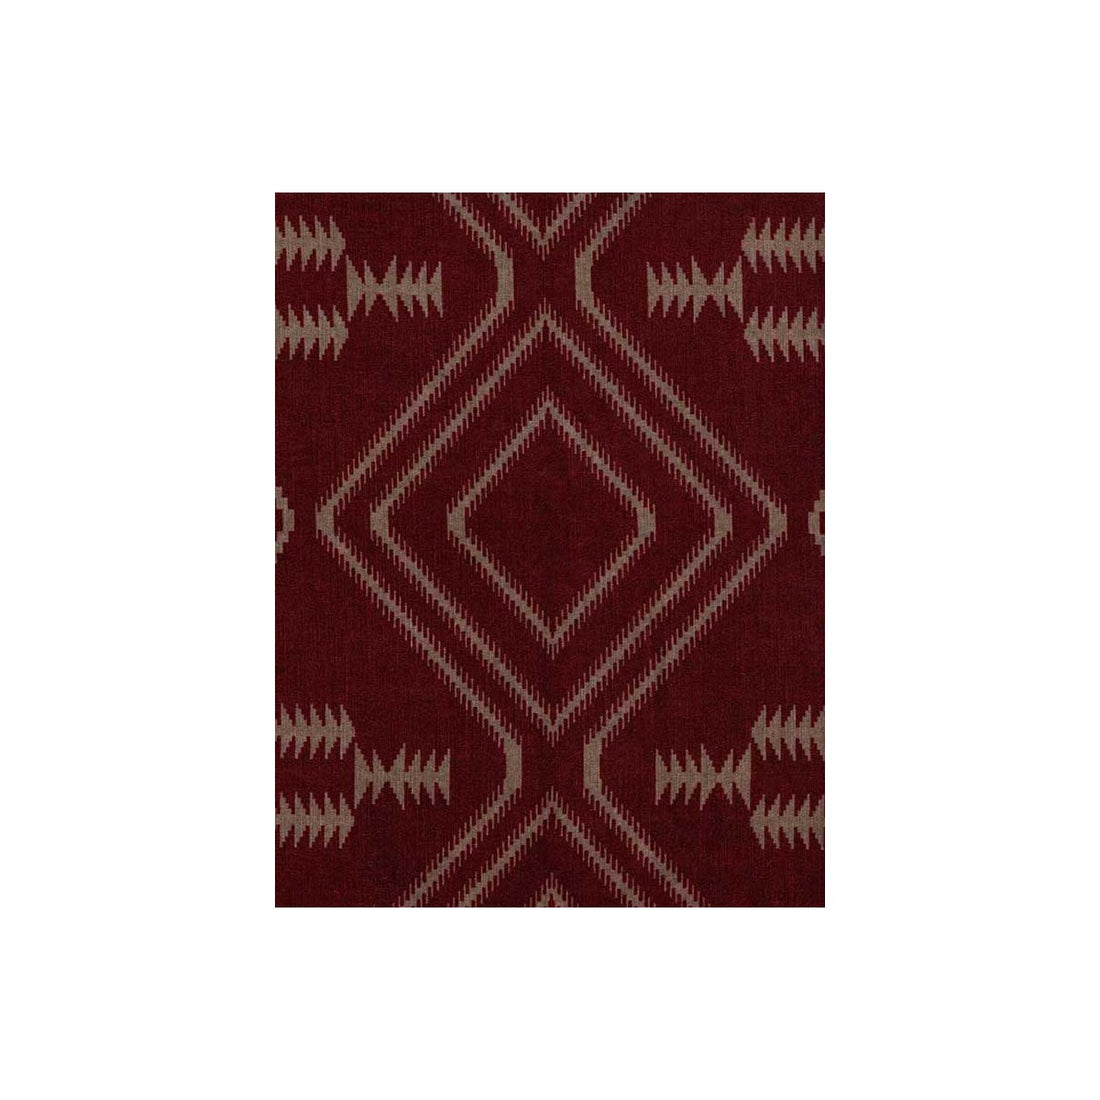 Navaho fabric in red color - pattern AM100059.916.0 - by Kravet Couture in the Andrew Martin Compass Indiana collection